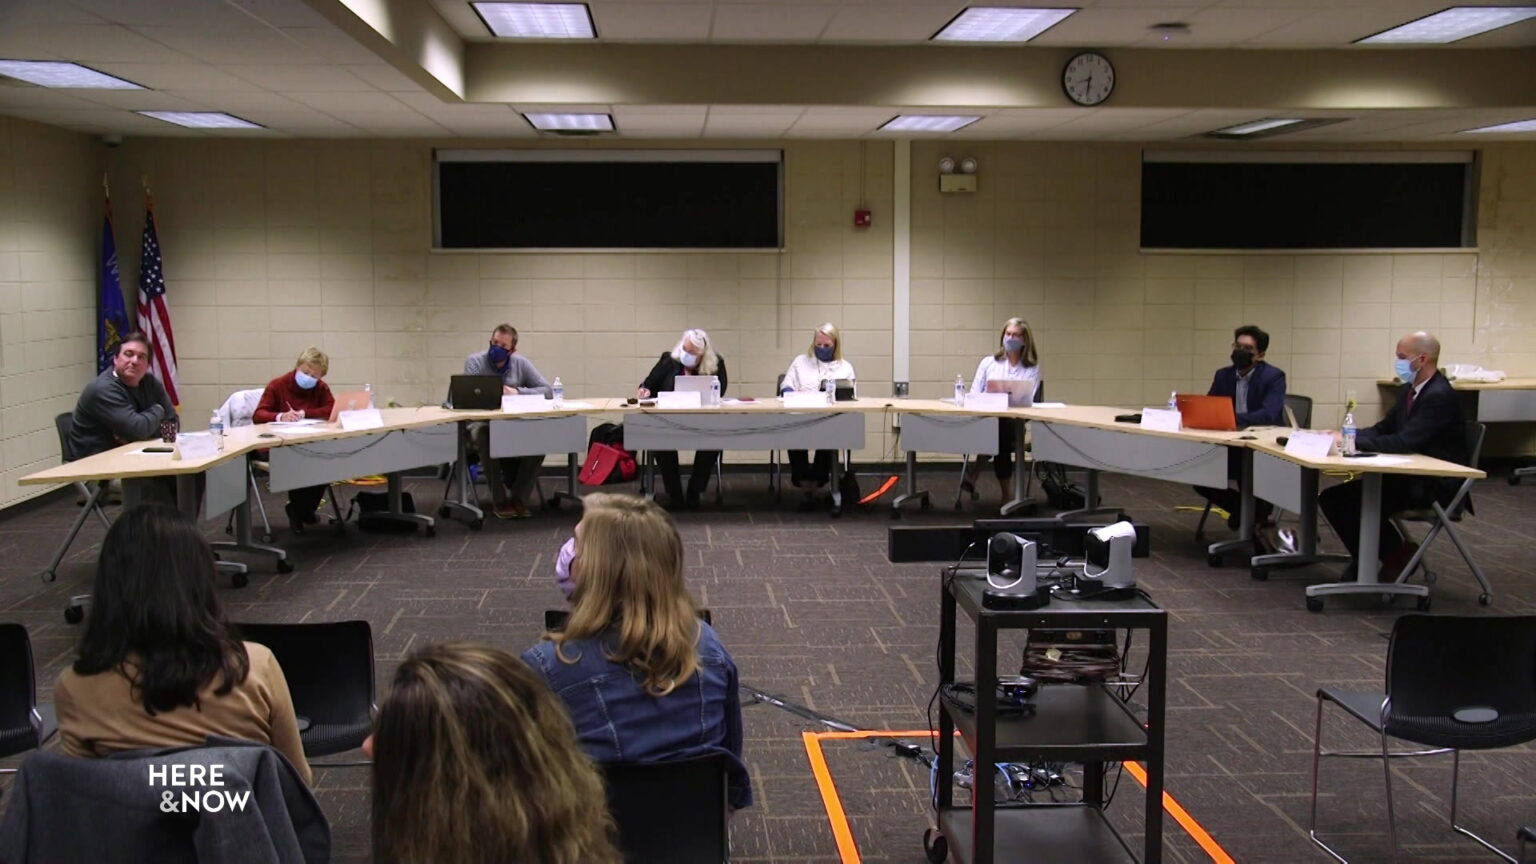 School board members sit at tables arranged in a semi-circle in front of seated audience members and a cart holding audio-visual equipment.